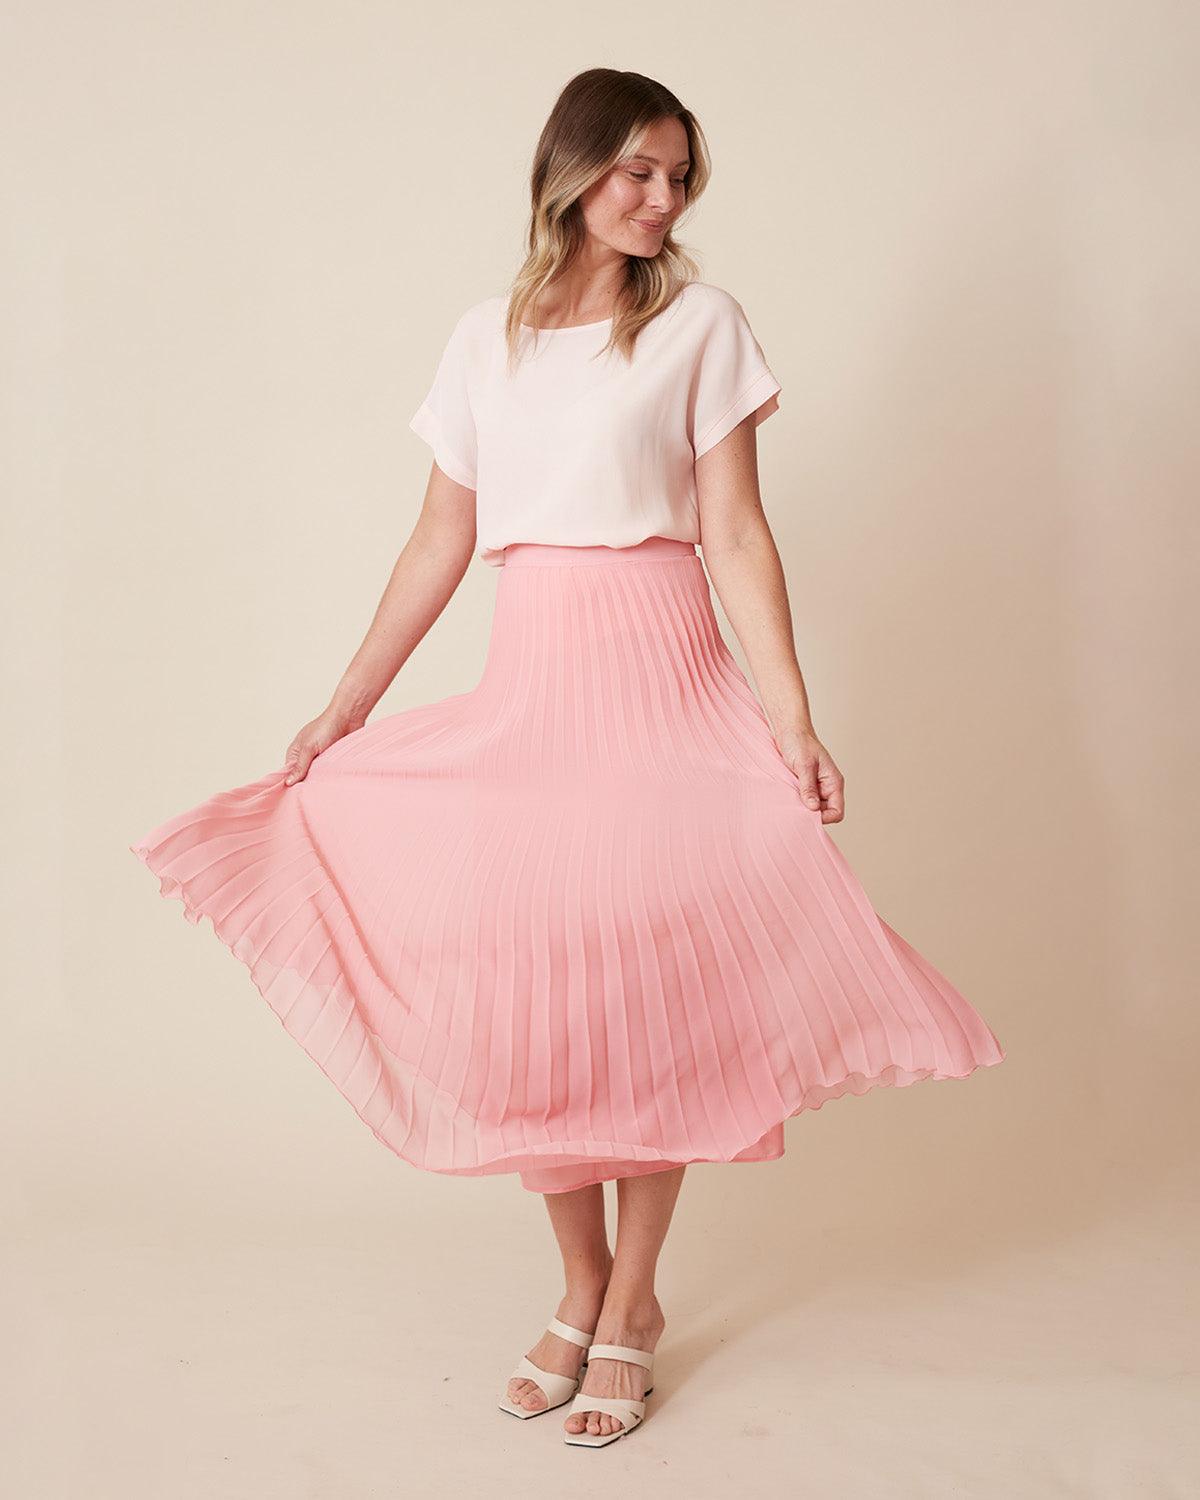 "#color_BLUSH PINK|Lauren is 5'9", wearing a size S